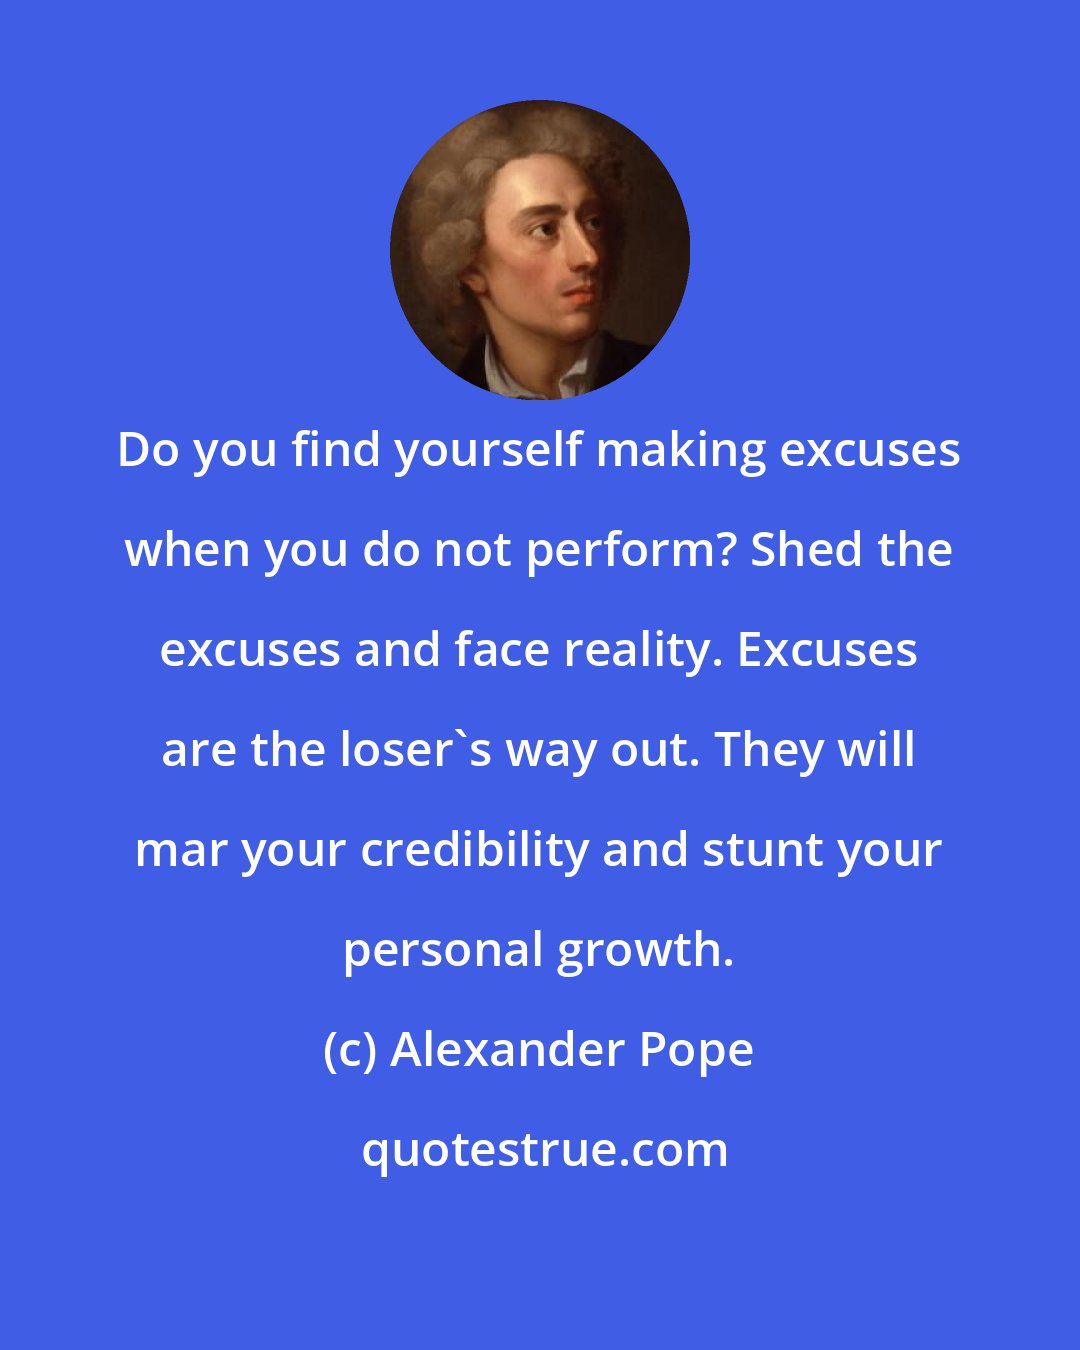 Alexander Pope: Do you find yourself making excuses when you do not perform? Shed the excuses and face reality. Excuses are the loser's way out. They will mar your credibility and stunt your personal growth.